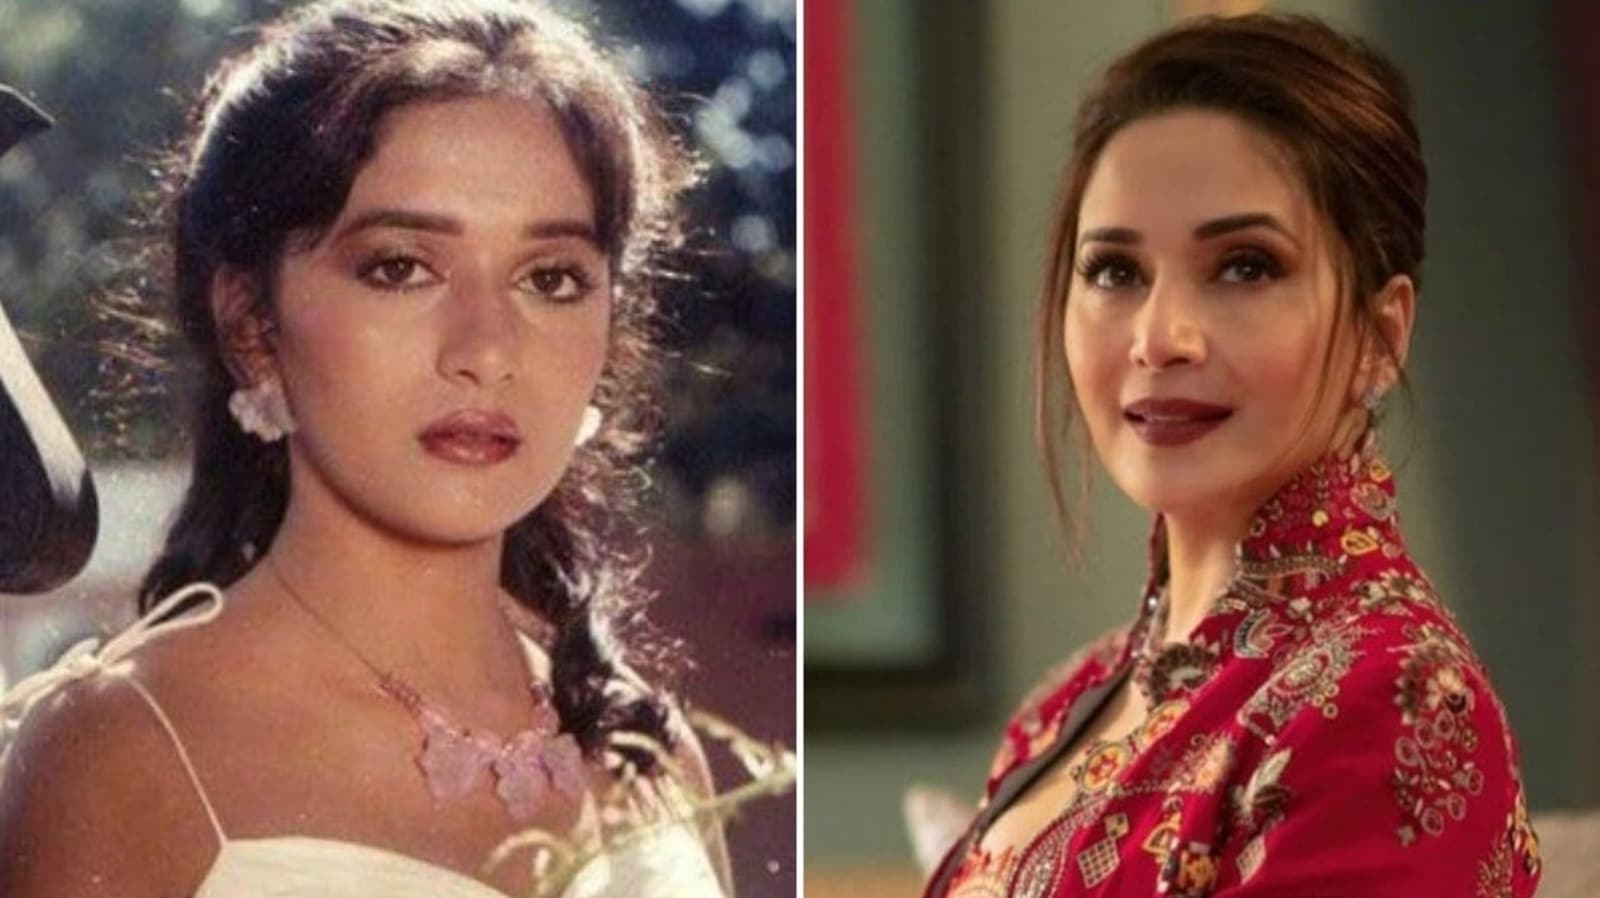 Madhuri Dixit says she was criticised for being ‘too thin’ when she joined films, people would say ‘isko mota karo’